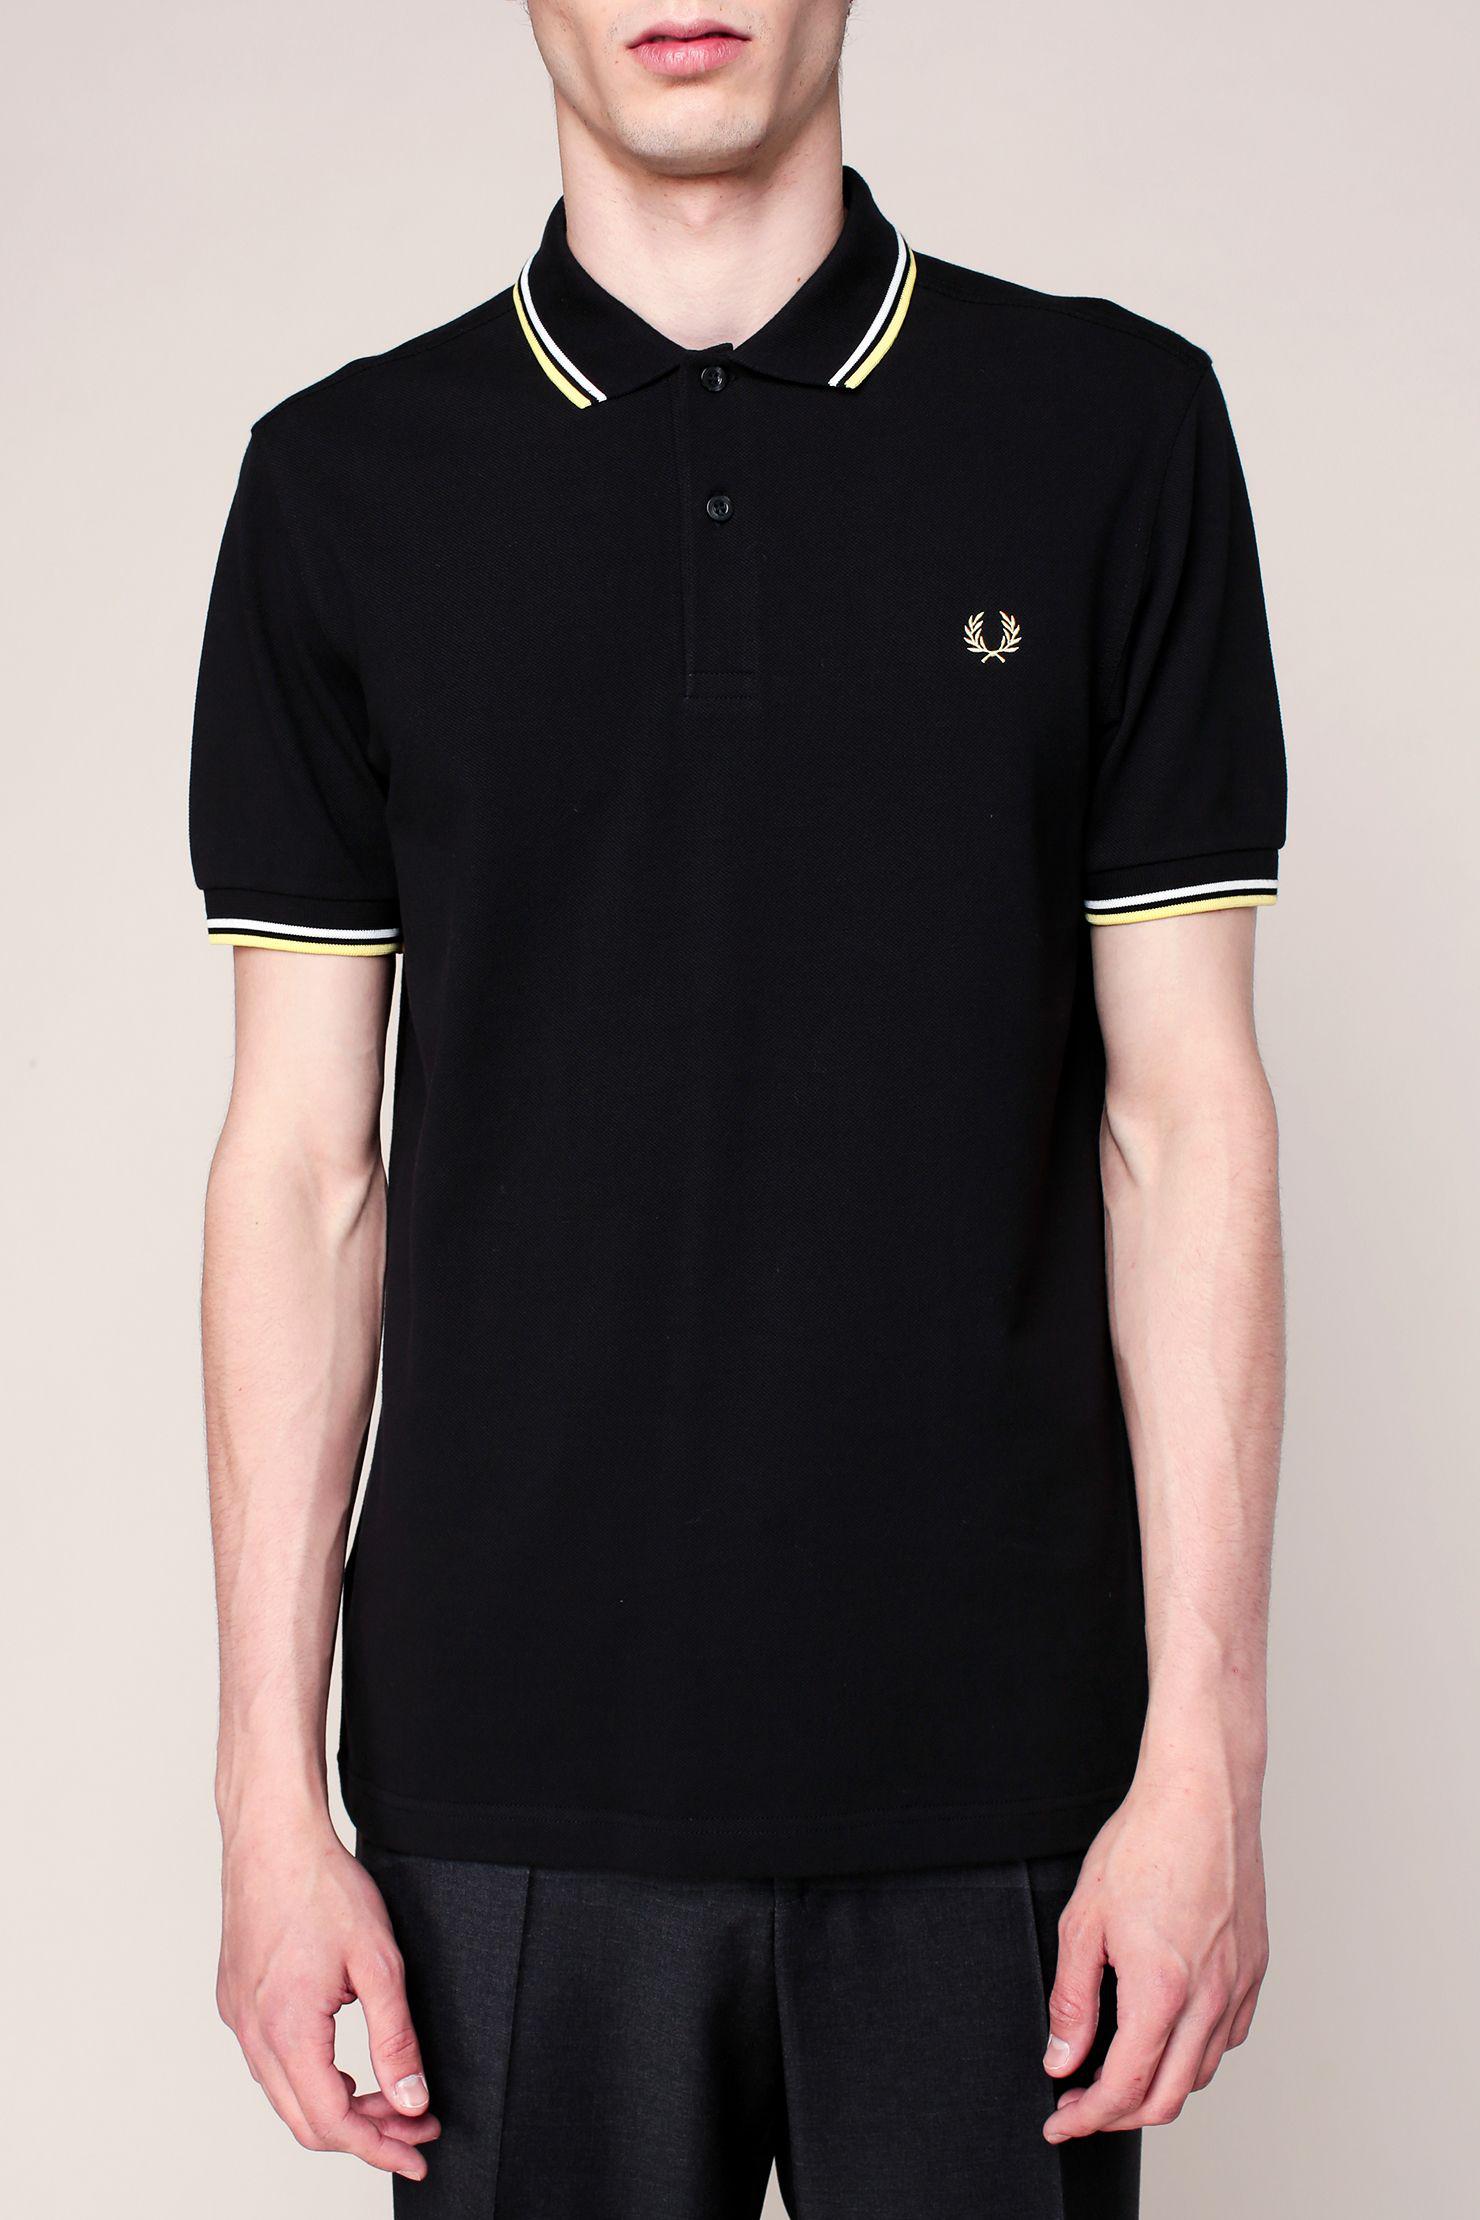 Lyst - Fred Perry Polo Shirt in Black for Men